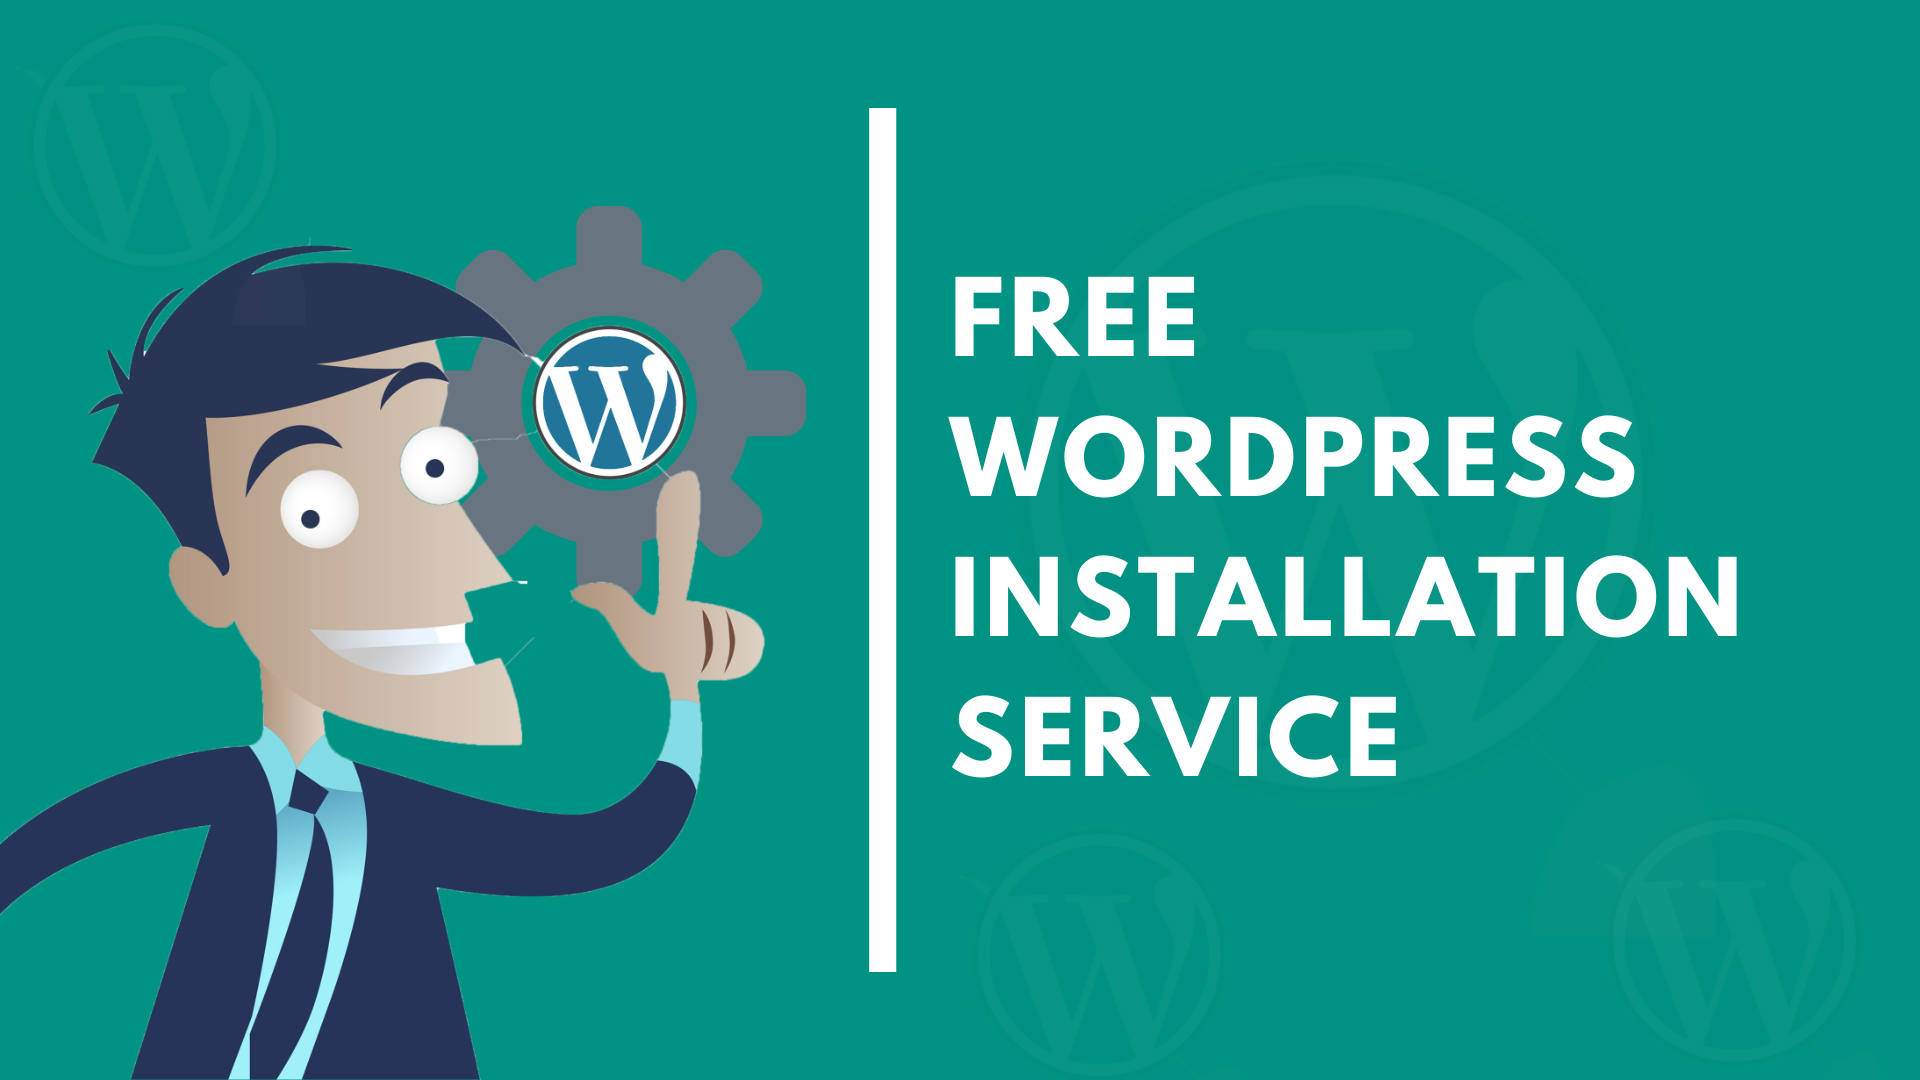 Are you looking for Free WordPress Installation Service?